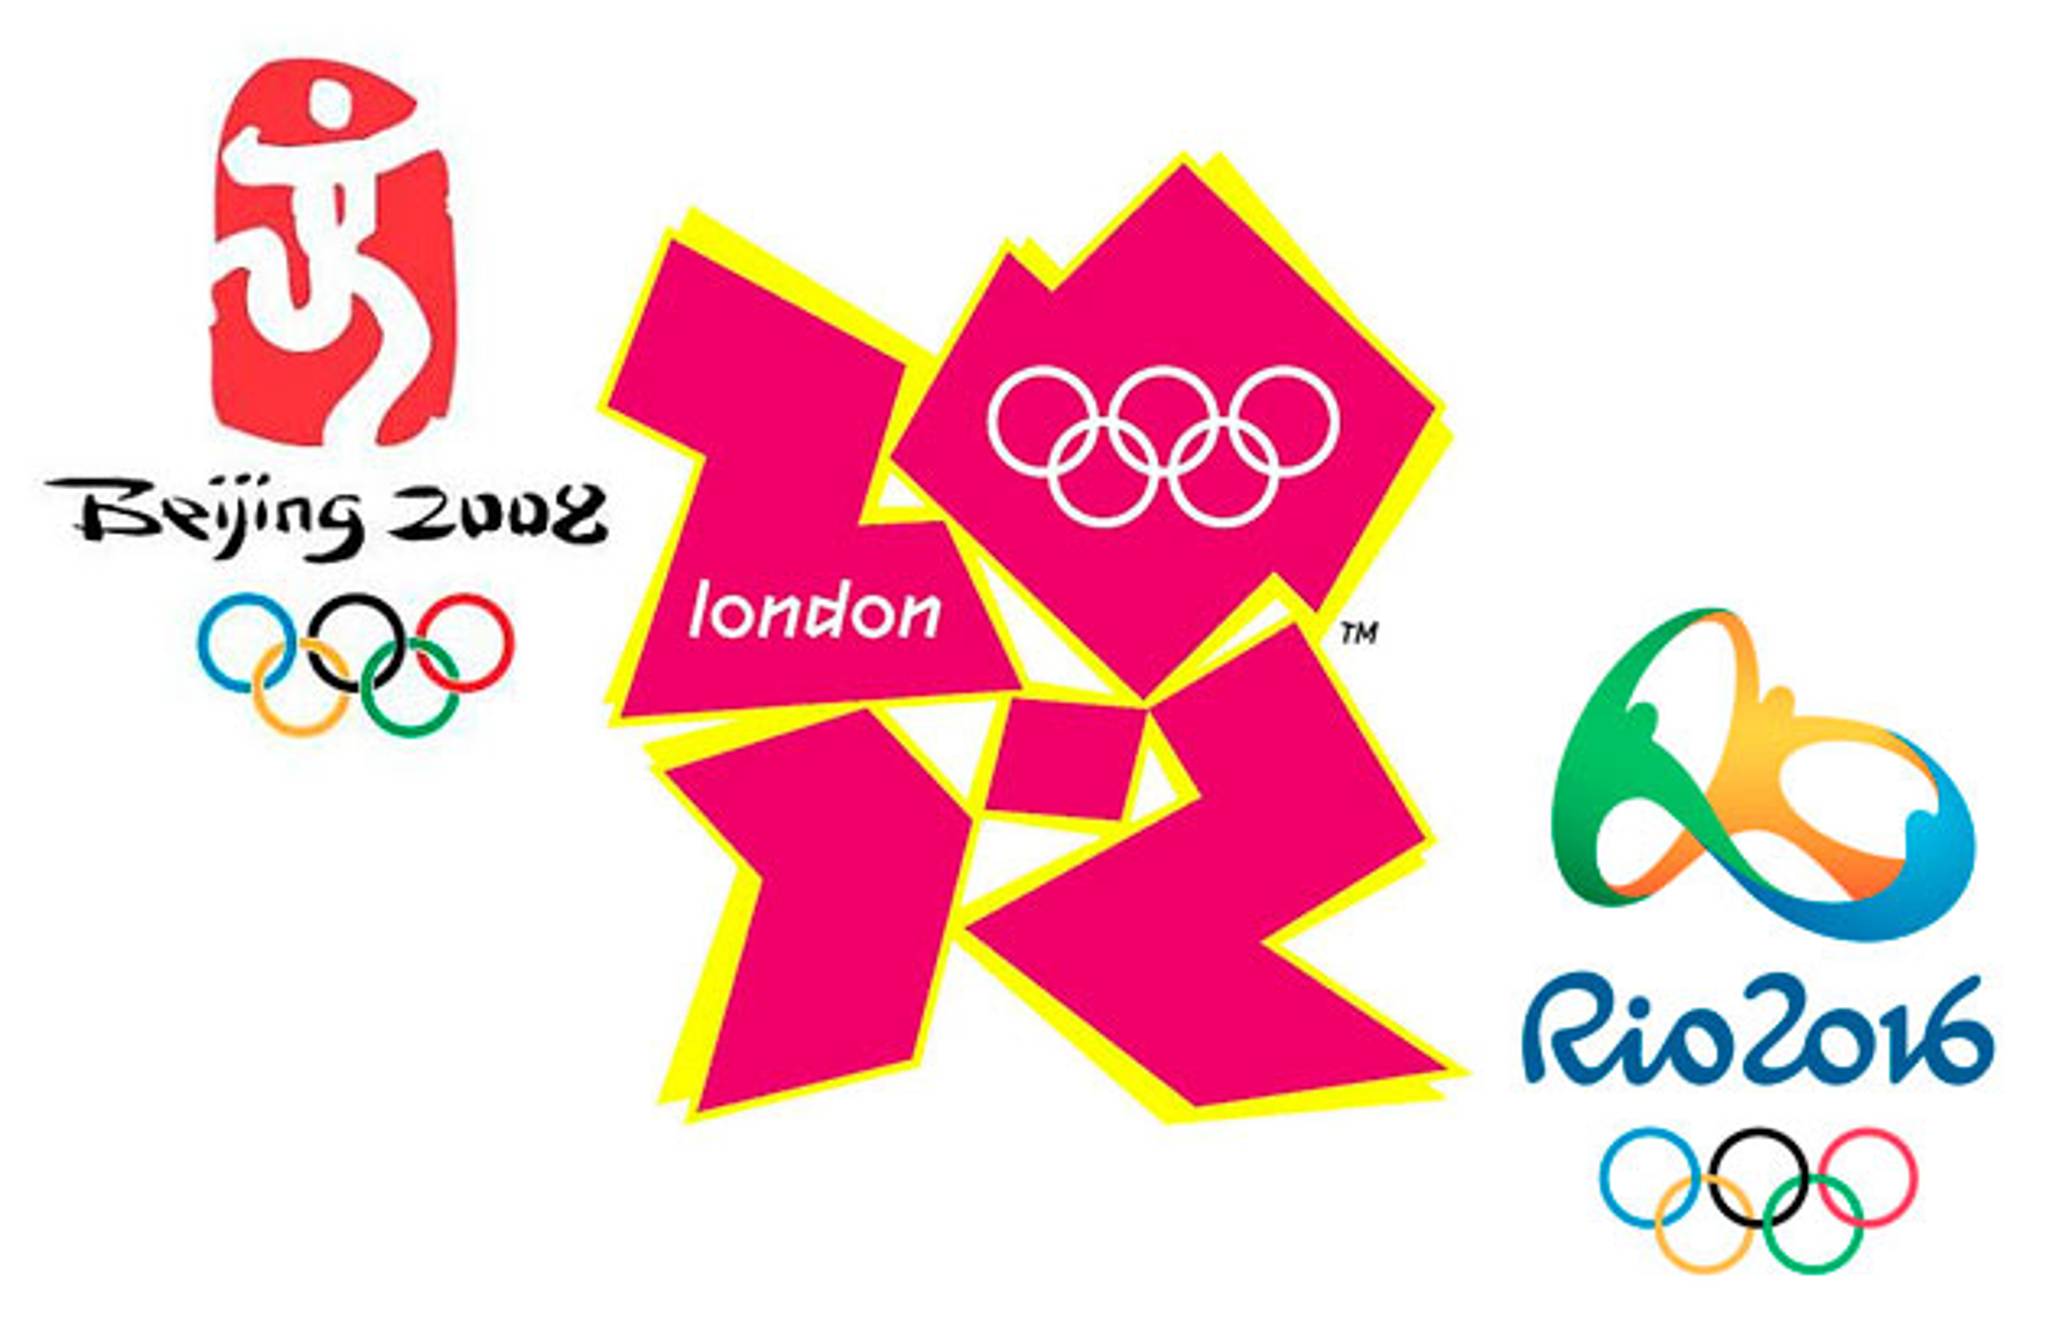 The significance of the Olympics